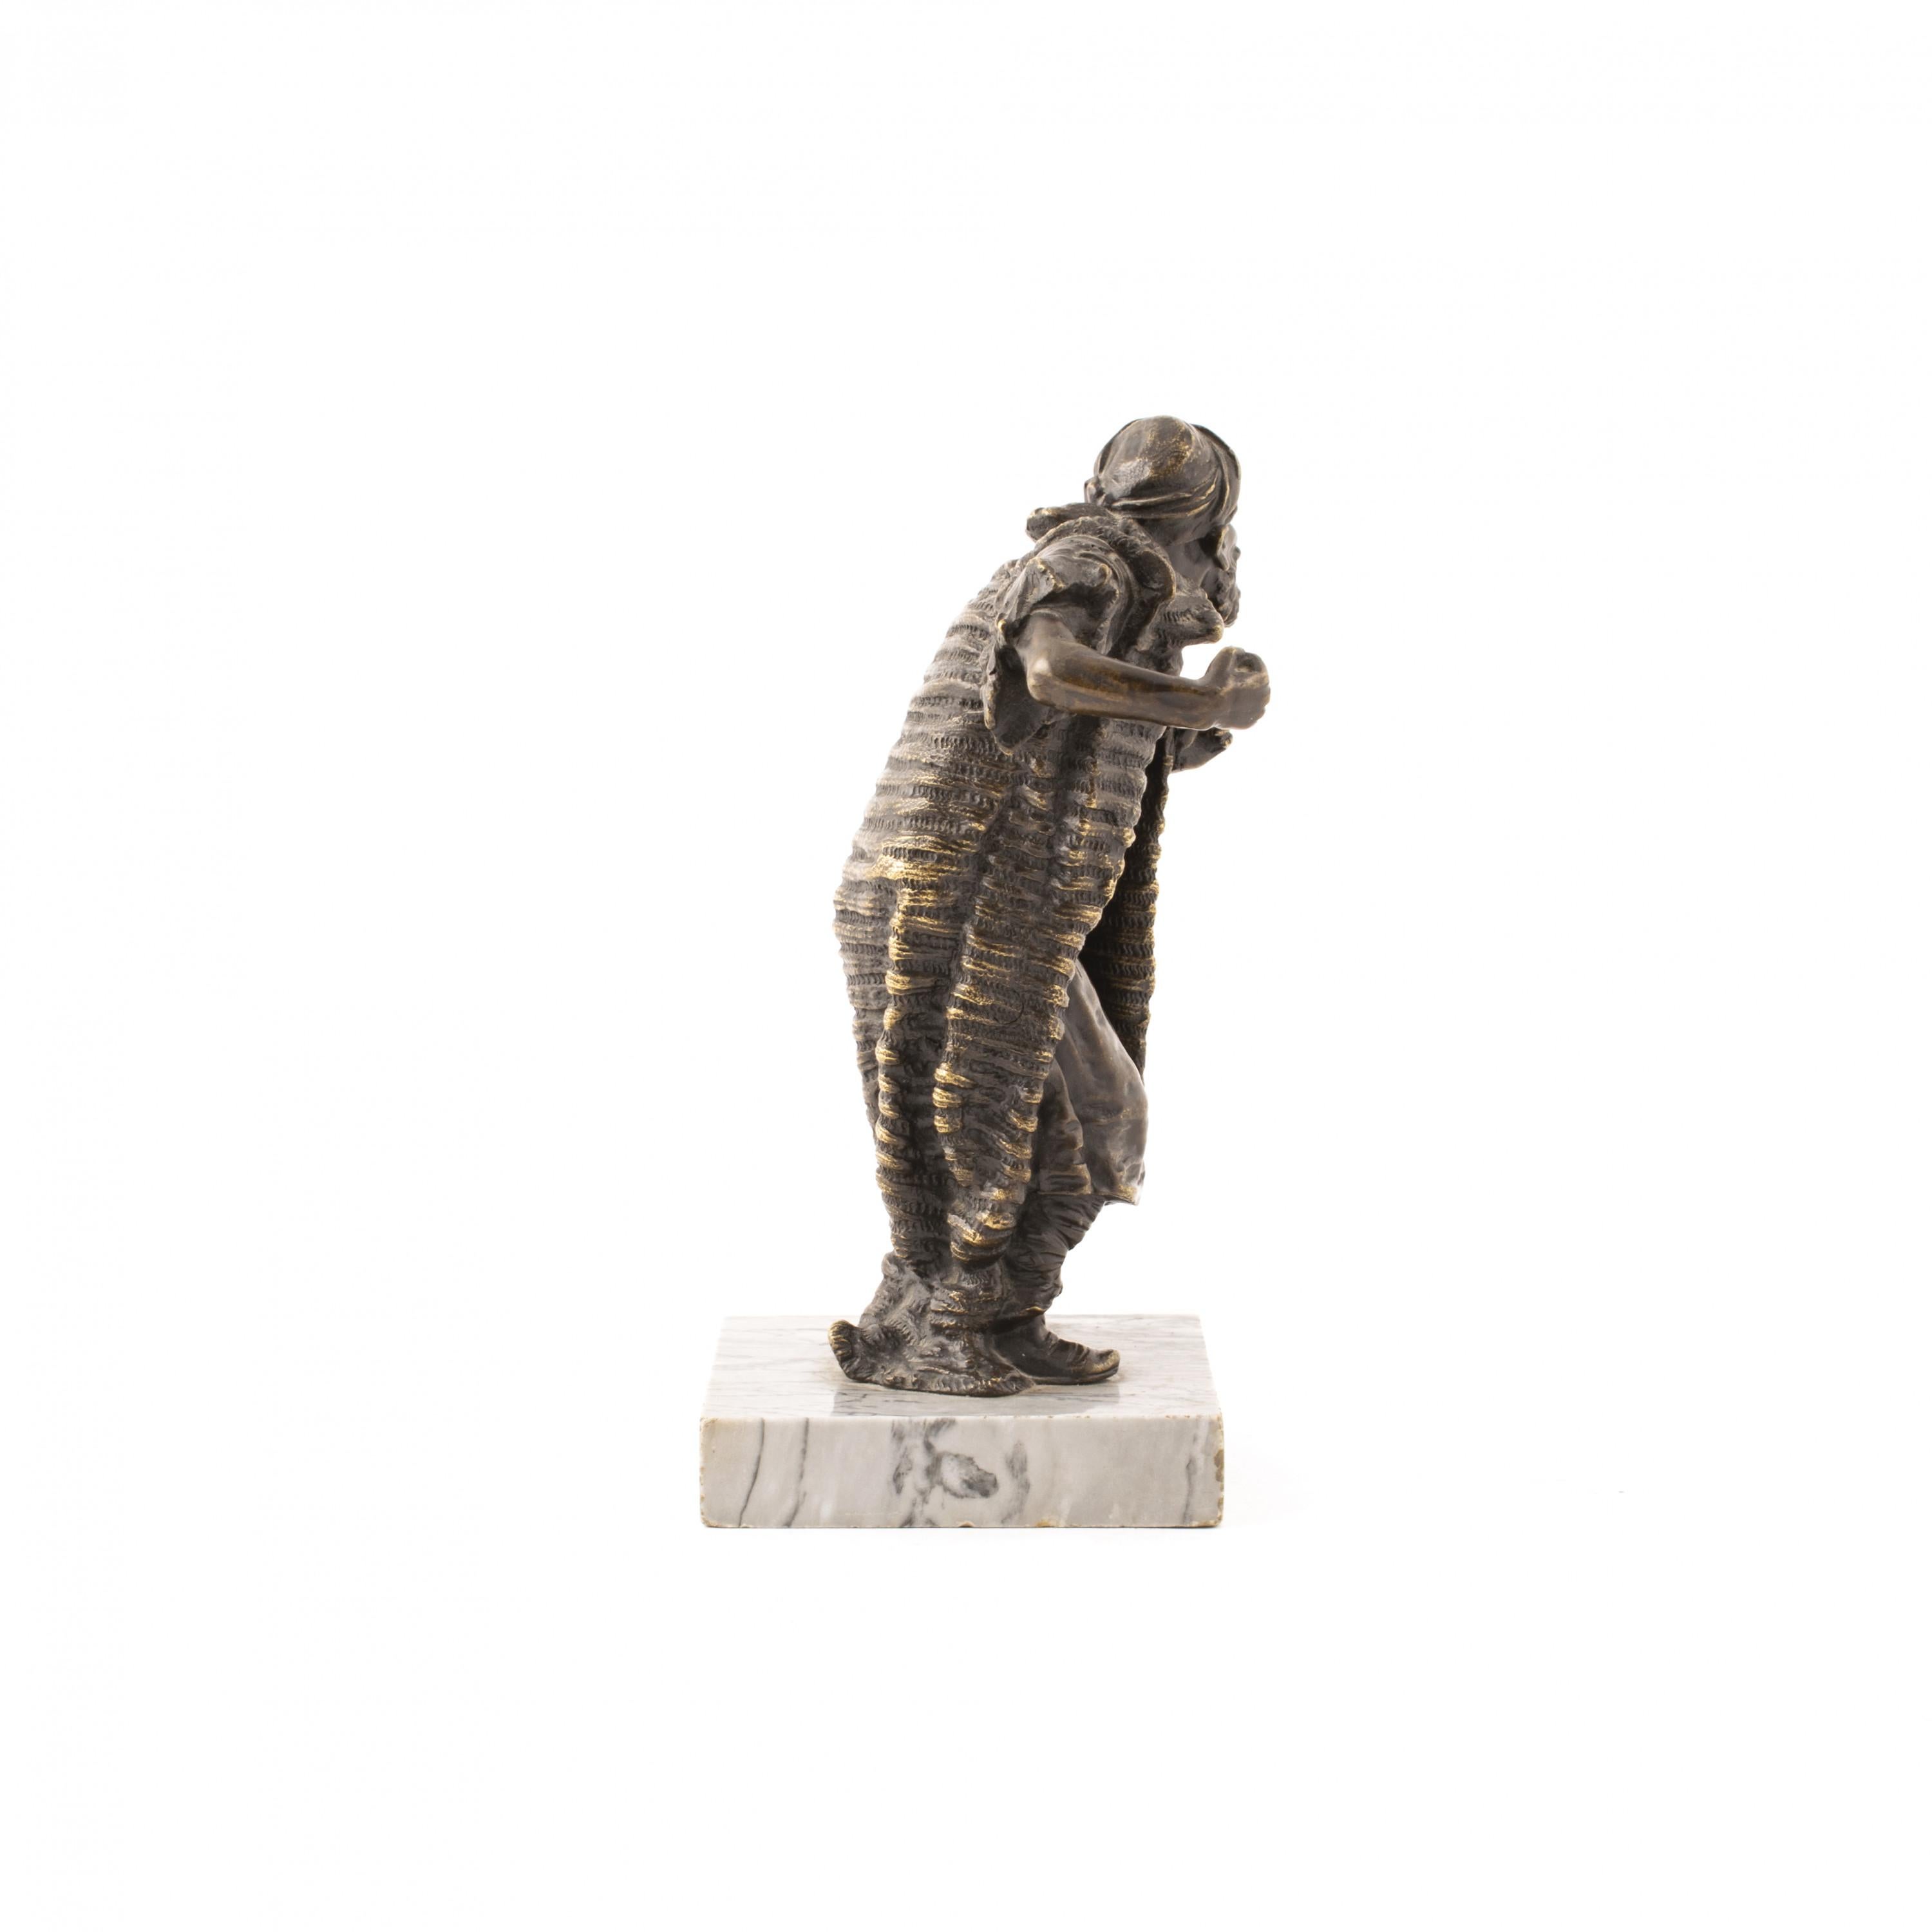 Franz Xavier Bergmann, 1861-1936.
Bronze figurine made by famous Viennese Bergmann foundry in 1900-1910, depicts an Arab merchant.
Sculpture mounted on grey marble base stamped “GESCHÜTZT” (English: PROTECTED) on the back of his garments, and